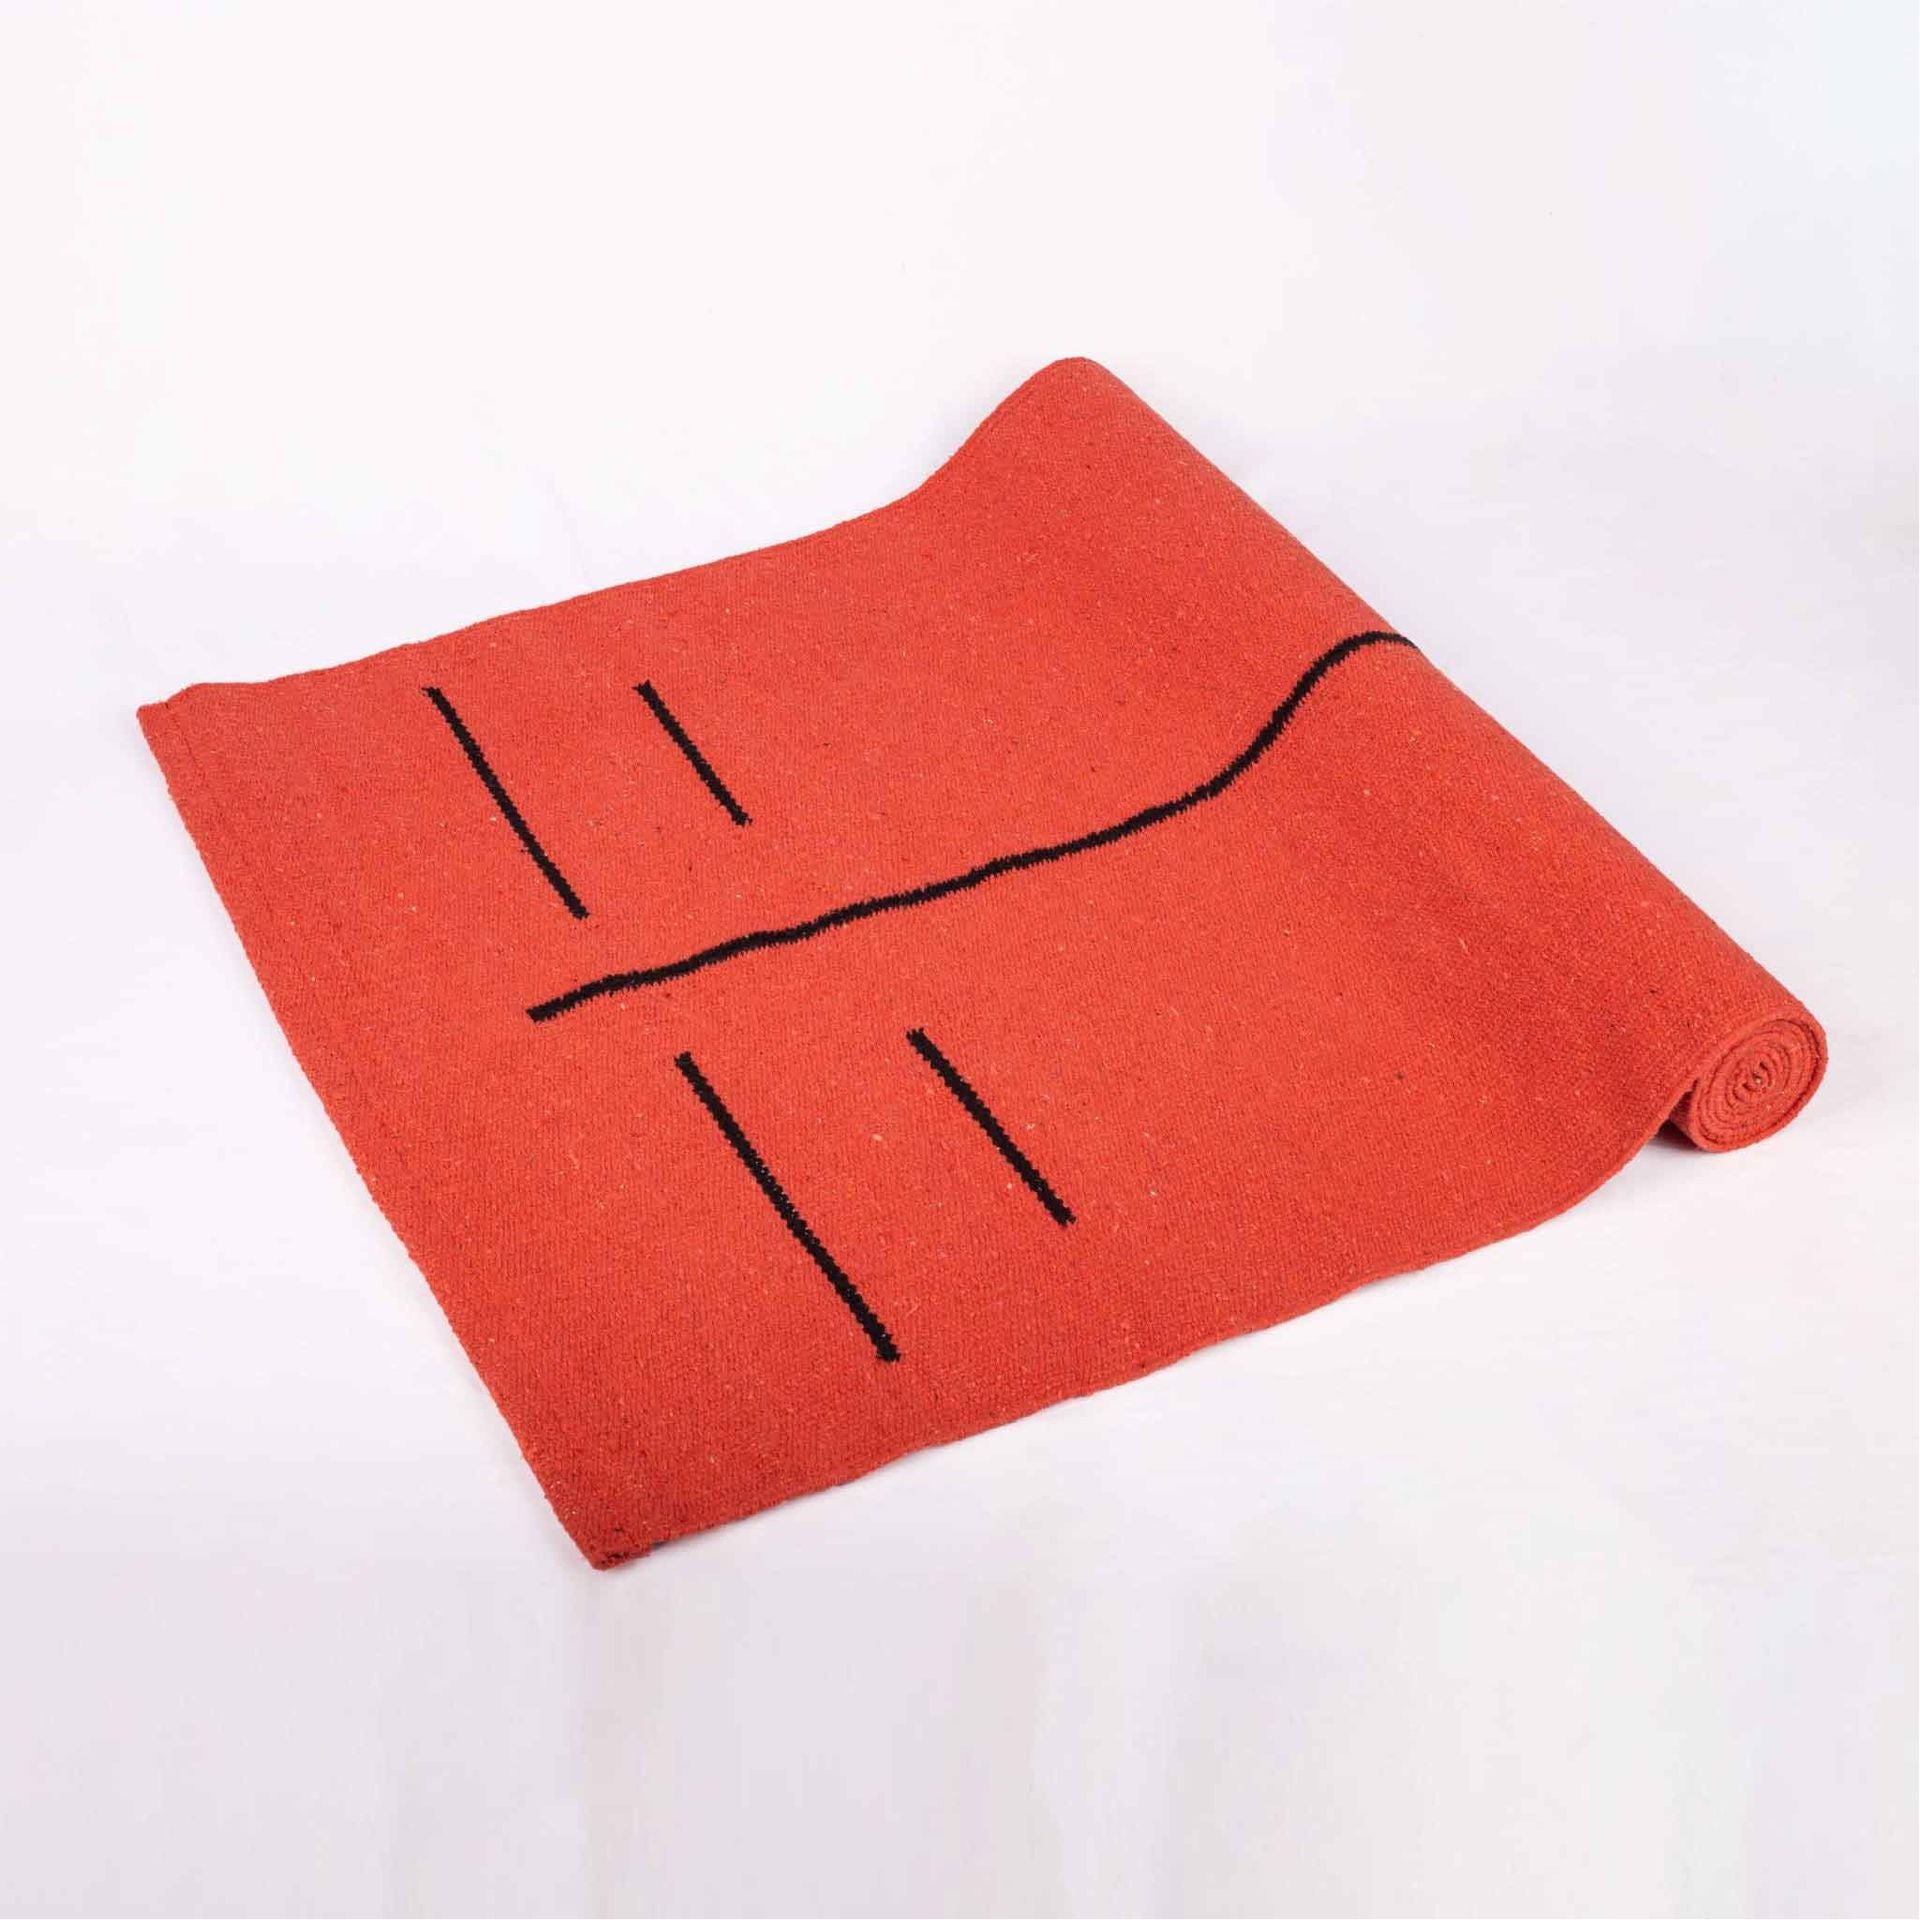 COTTON YOGA MAT - GEMSTONE SERIES 100%COTTON WASHABLE RUBBER BACKING MADE IN INDIA 4 MM WITH CARRYING STRAP AND BAG COLOUR CORAL RED - hfnl!fe